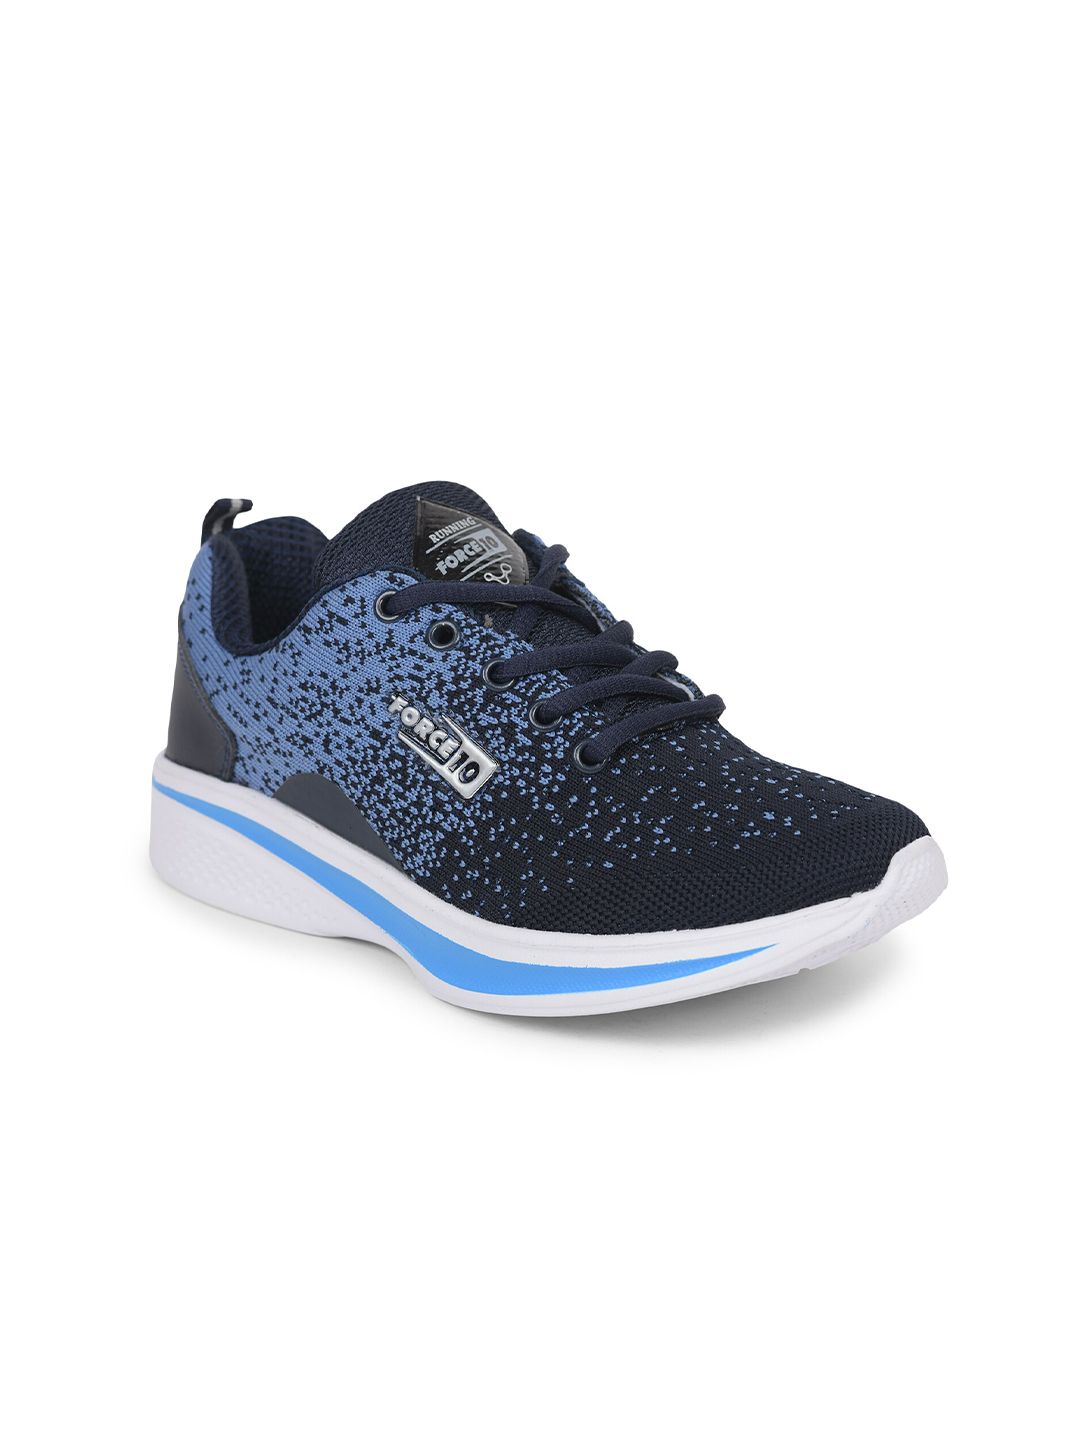 Liberty Women Navy Blue Mesh Running Non-Marking Shoes Price in India